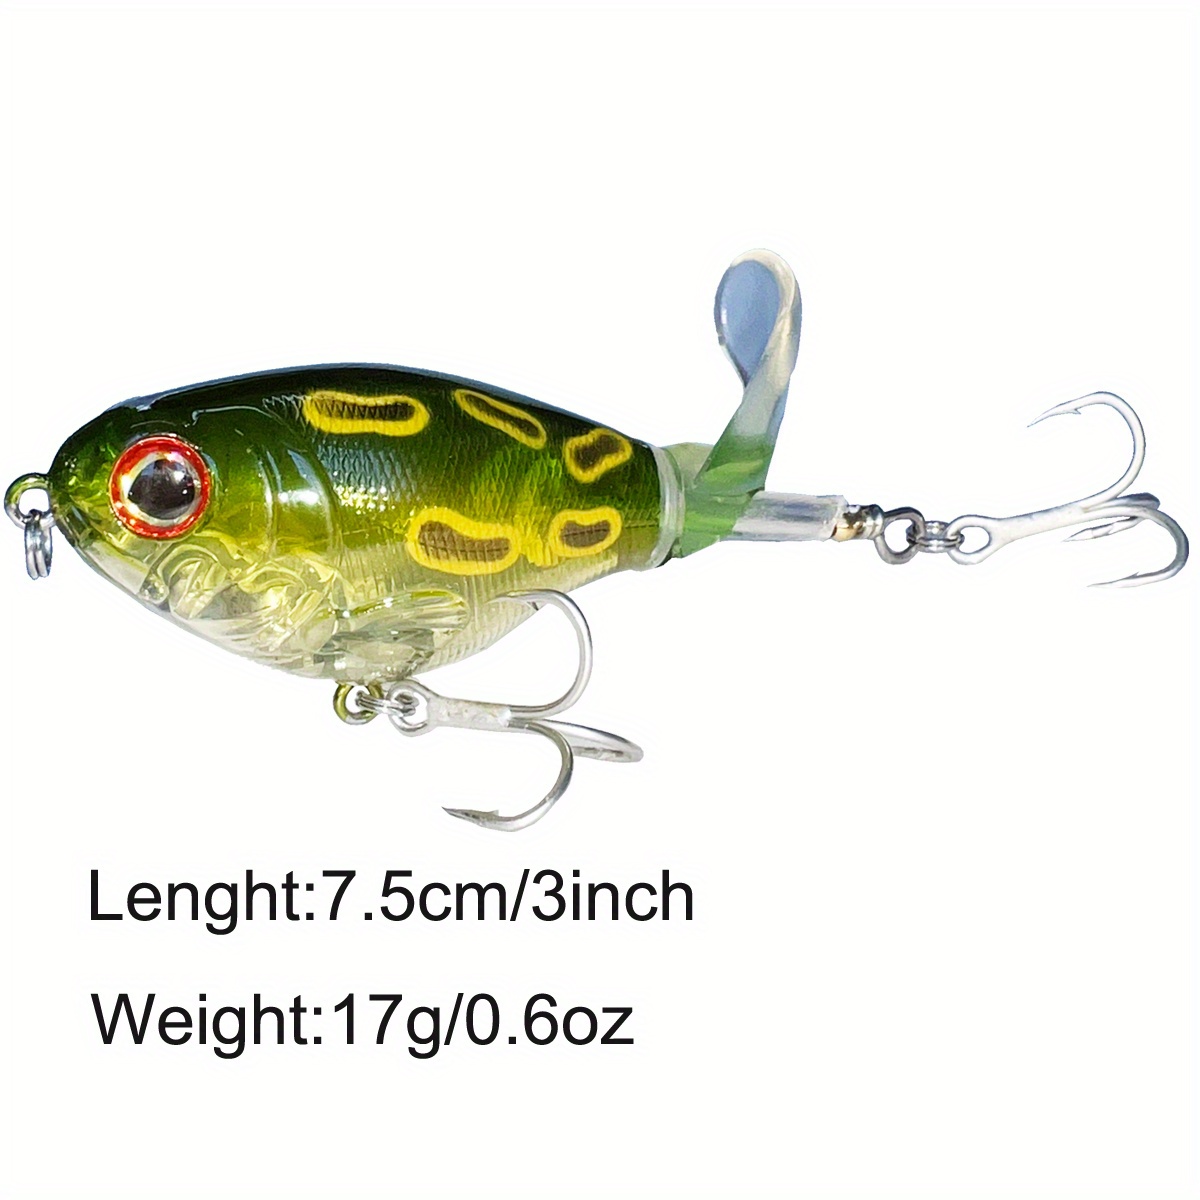 DOITPE Fishing Lures Plopper Bass Lures with Floating Rotating Tail Barb Treble Hooks in Saltwater and Freshwater Lures for Bass Trout Walleye Pike